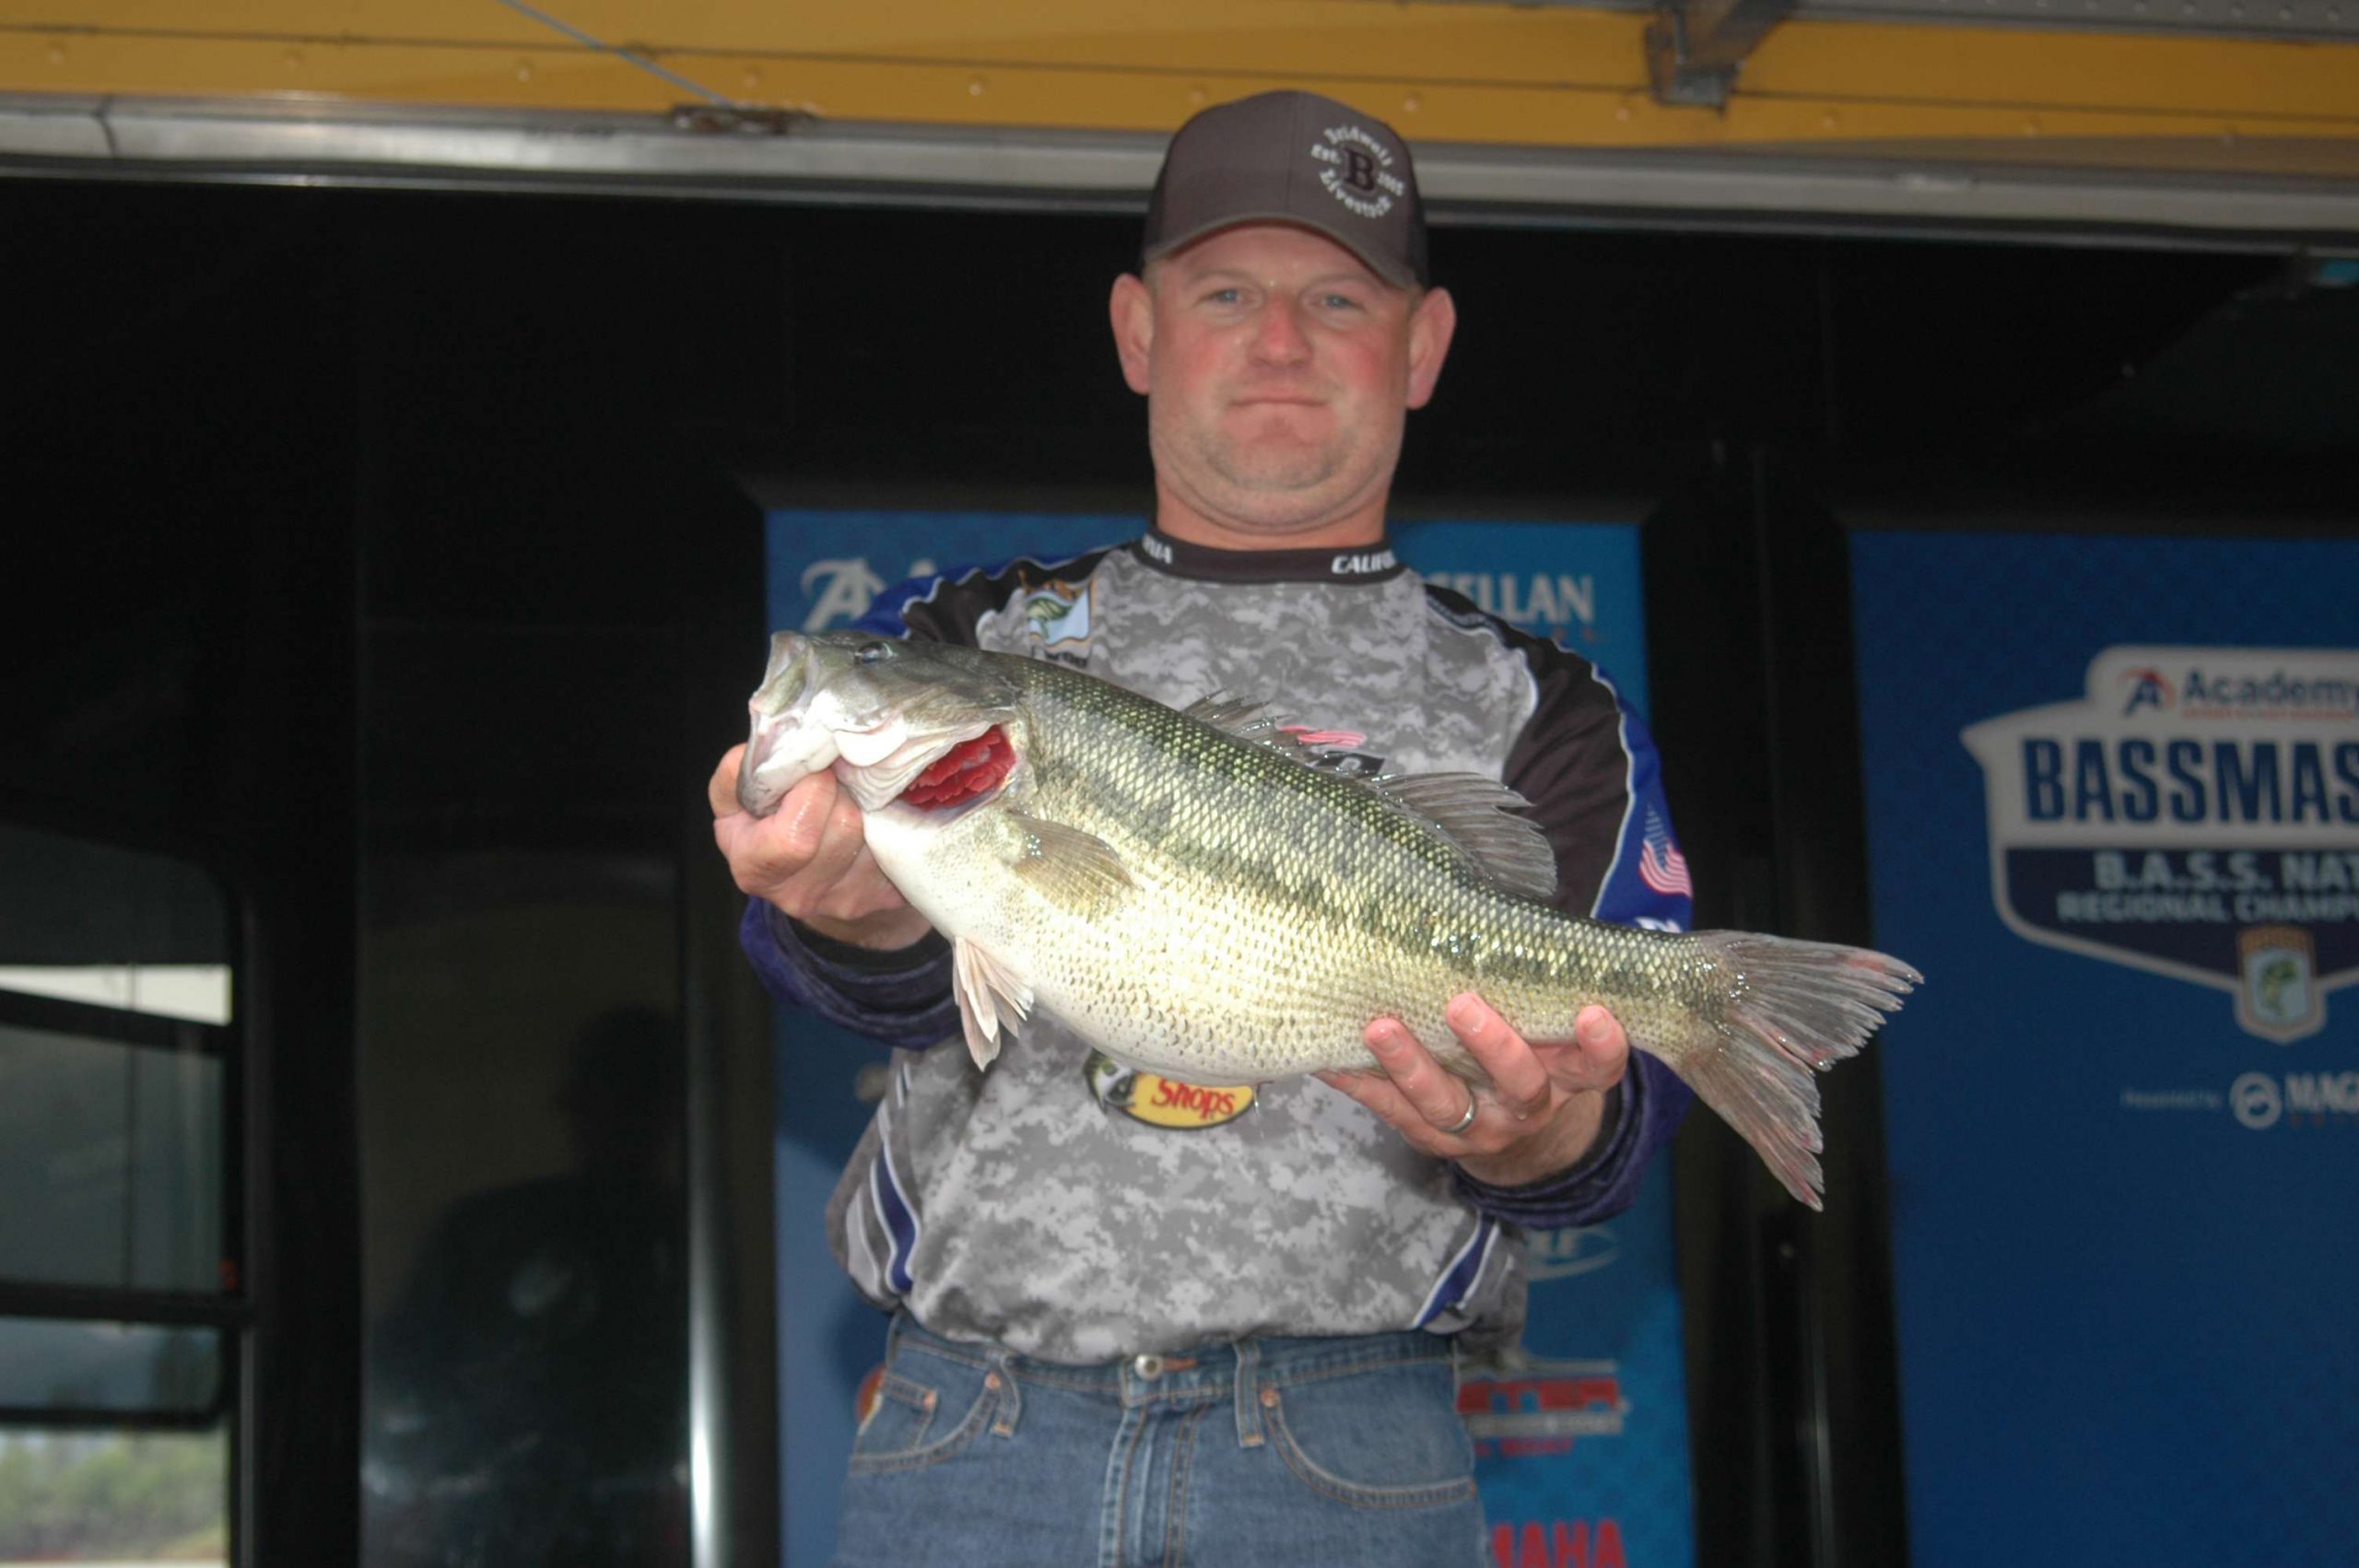 Nick Wood on the California B.A.S.S. Nation team caught a 6-pound, 9-ounce spotted bass at Lake Shasta. It was the Big Bass on the first day of the tournament.